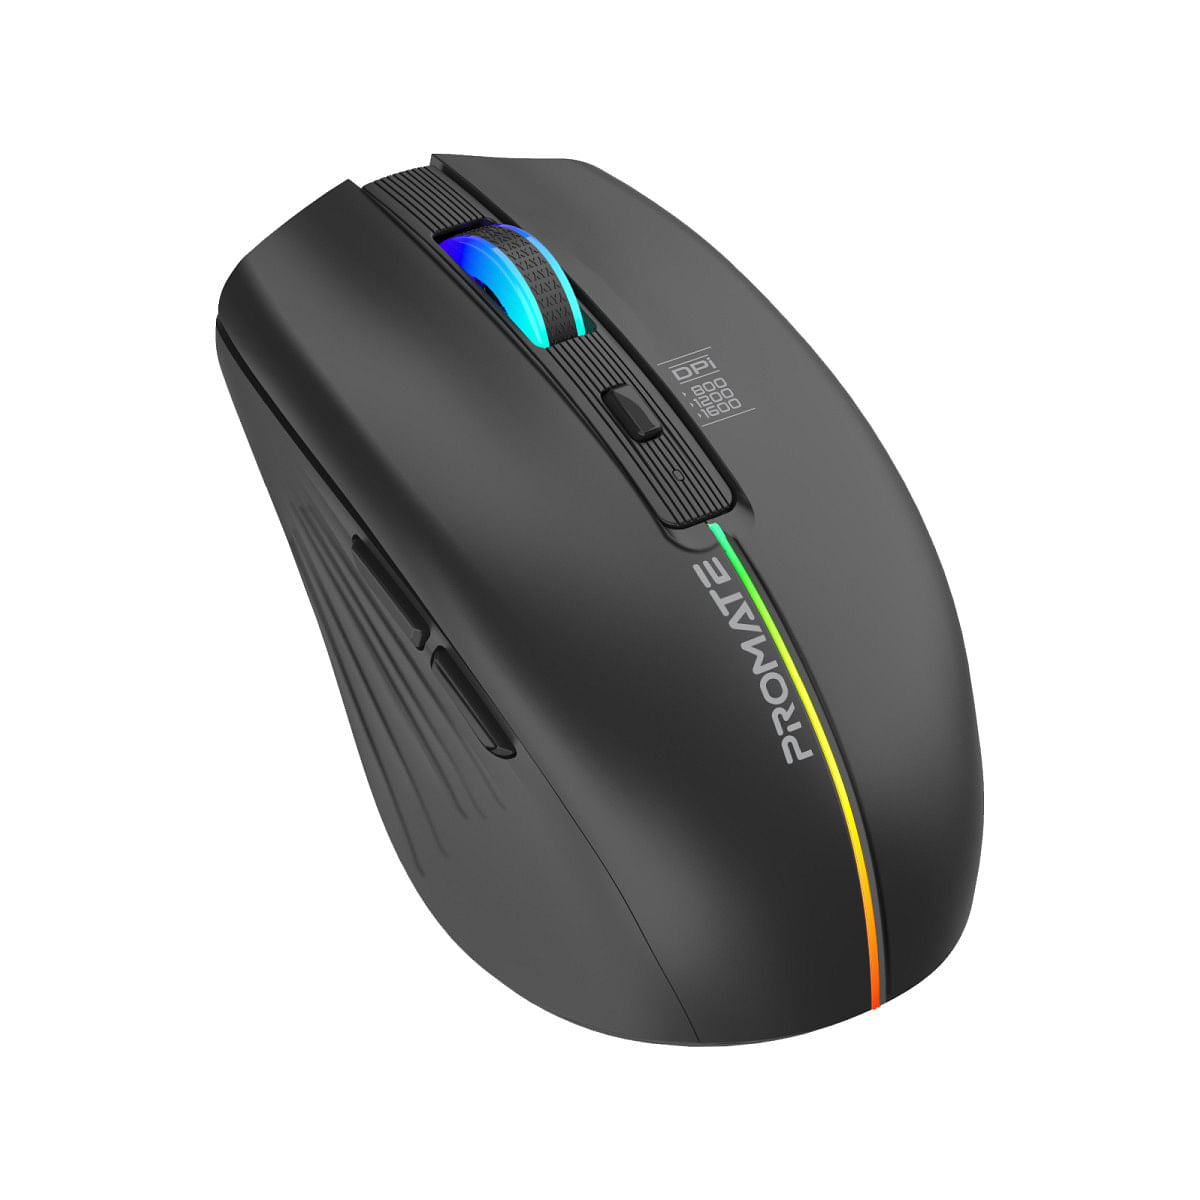 Promate Wireless Mouse, Ergonomic 500mAh Rechargeable LED Backlit Mice with Adjustable 1600DPI, 6 Functional Buttons, RGB Modes and 2.4Ghz Wireless Transmission for MacBook Air, Dell XPS 13, Asus, Kitt.BLACK